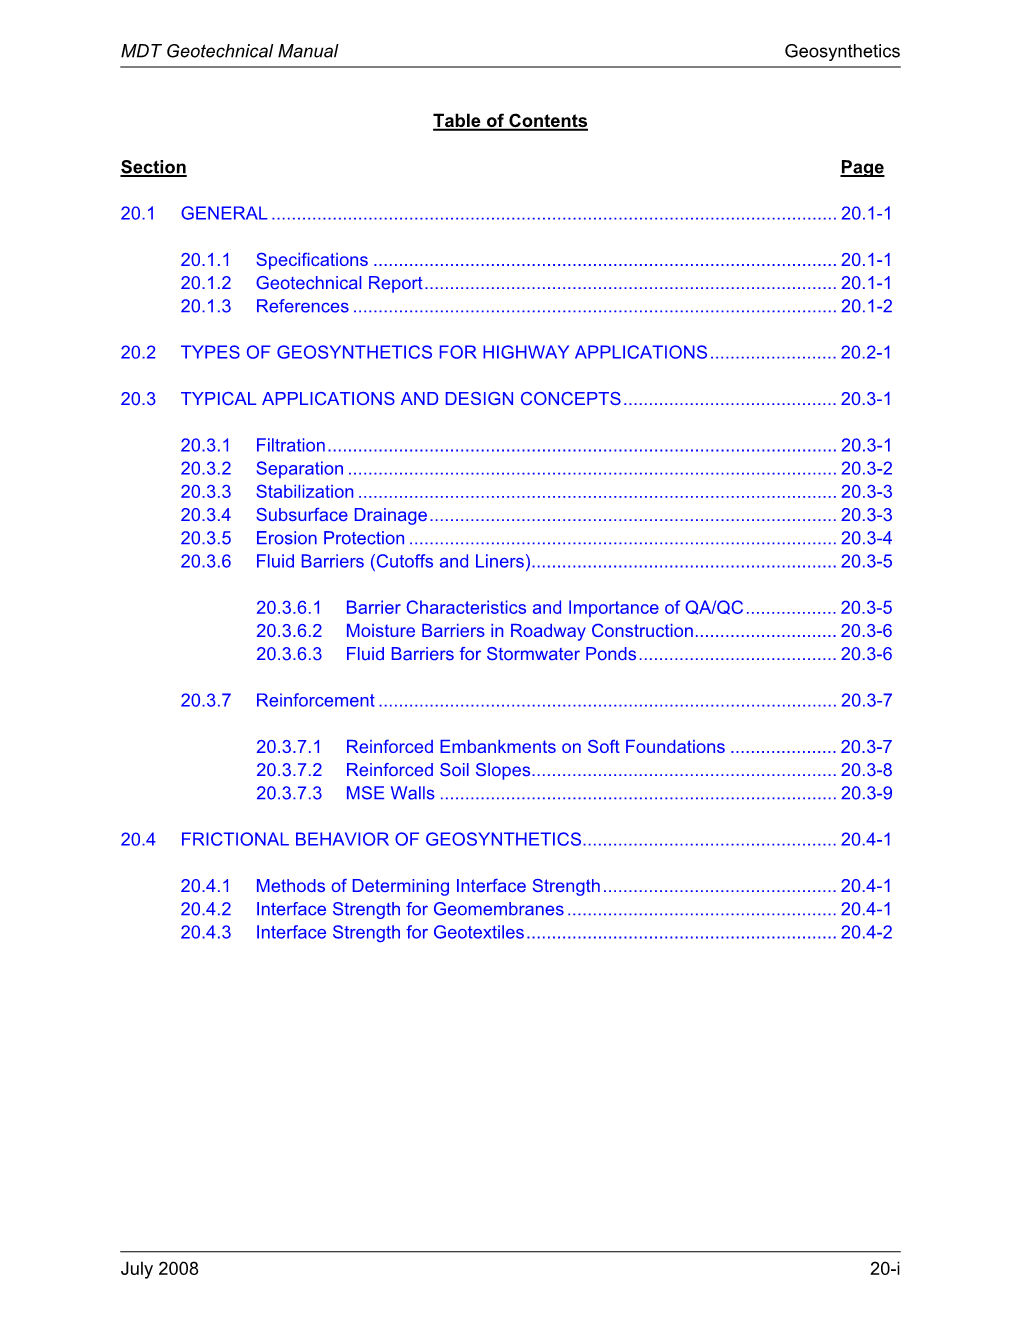 MDT Geotechnical Manual Geosynthetics July 2008 20-I Table of Contents Section Page 20.1 GENERAL